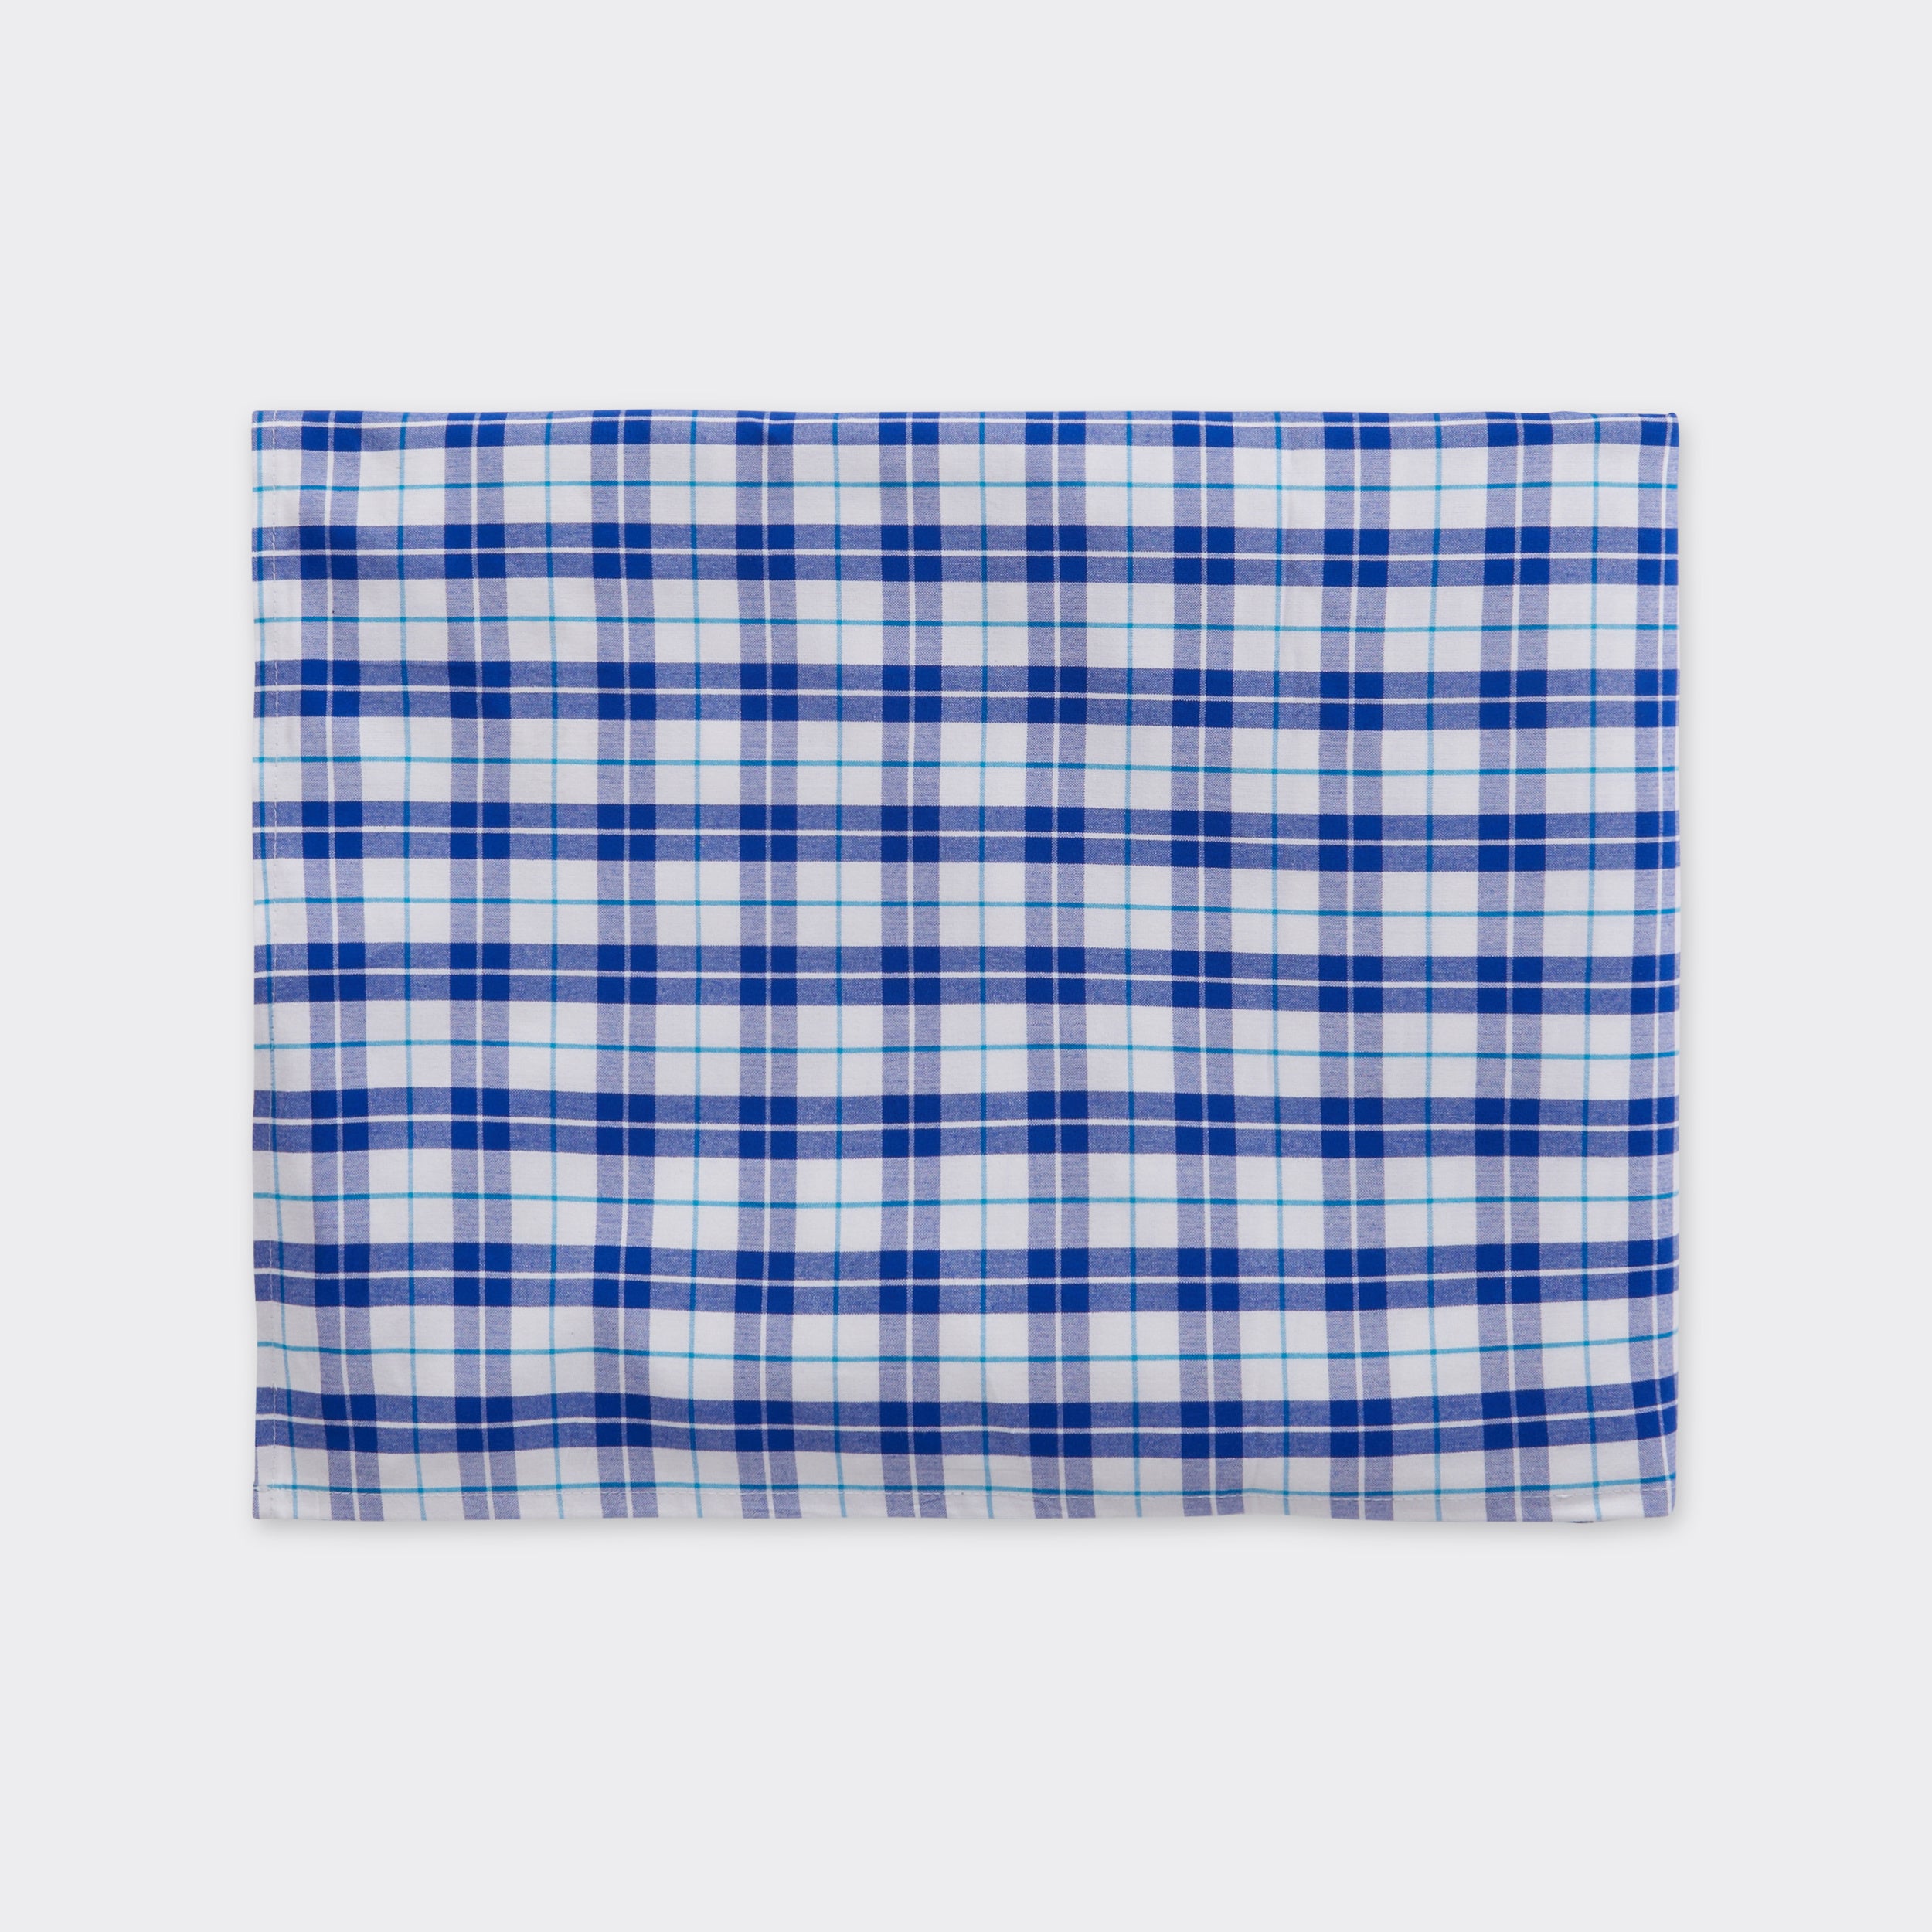 Bed cover in Maasai checkered fabric blue&white